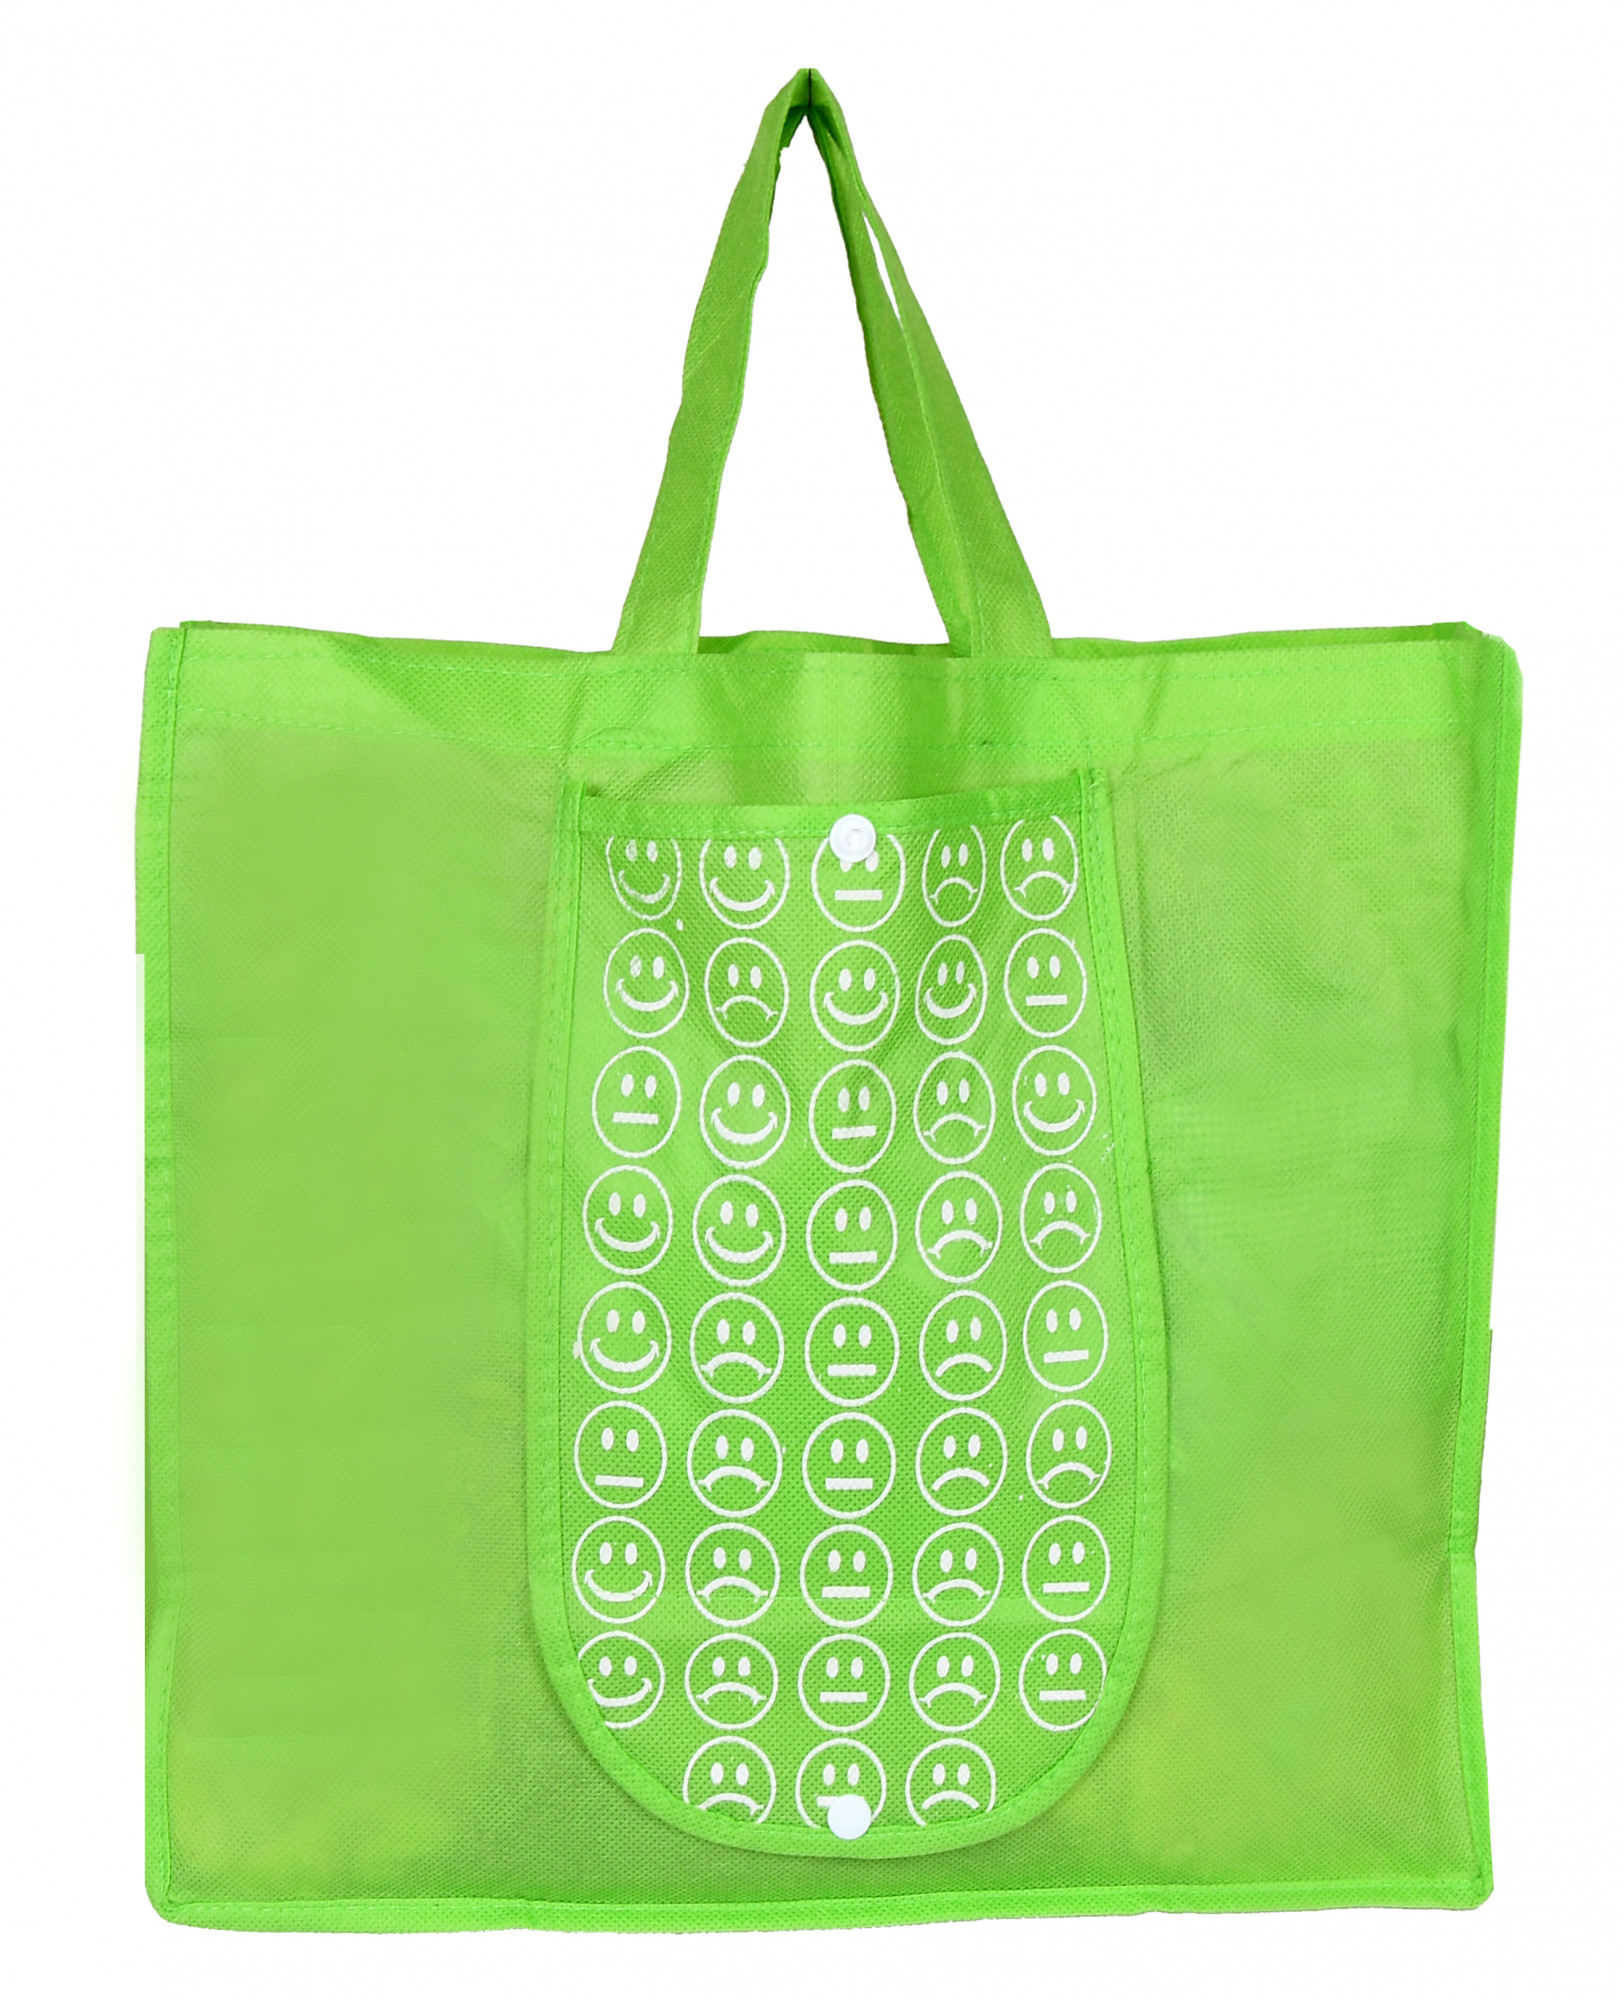 Kuber Industries Shopping Grocery Bags Foldable, Washable Grocery Tote Bag with One Small Pocket, Eco-Friendly Purse Bag Fits in Pocket Waterproof & Lightweight (Orange & Green)